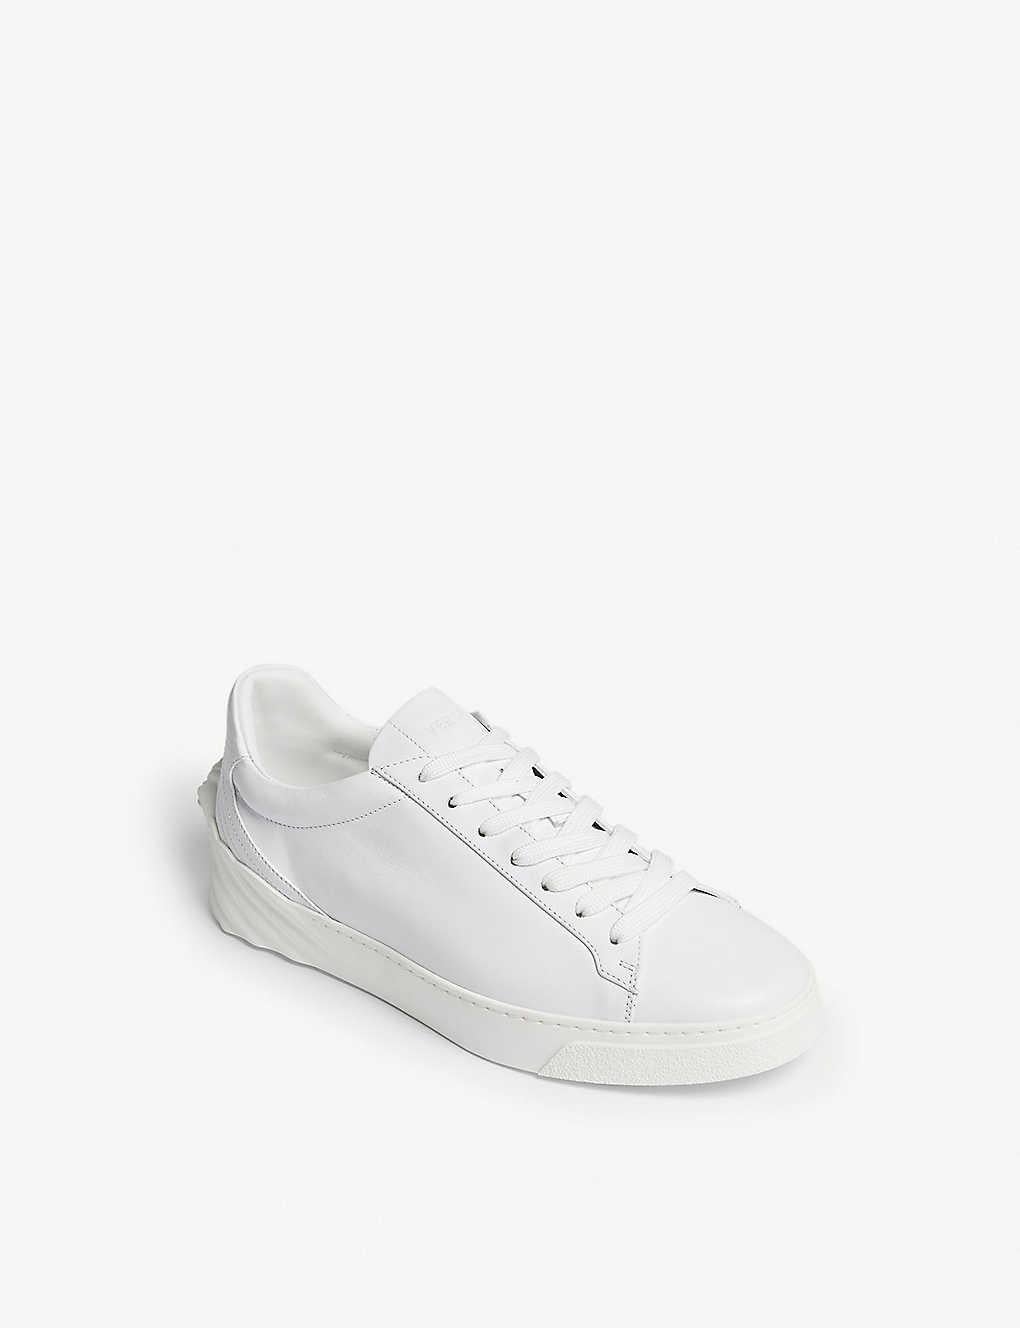 VERSACE 



Versace leather trainers
Lace up
Brand-embossed tongue
 round toe
 3D heel logo
 textured outer sole
 contemporary sole pattern
Leather upper and lining, synthetic sole

 Italian size is 41 - US 8


Made in Italy
Brand new. Comes with